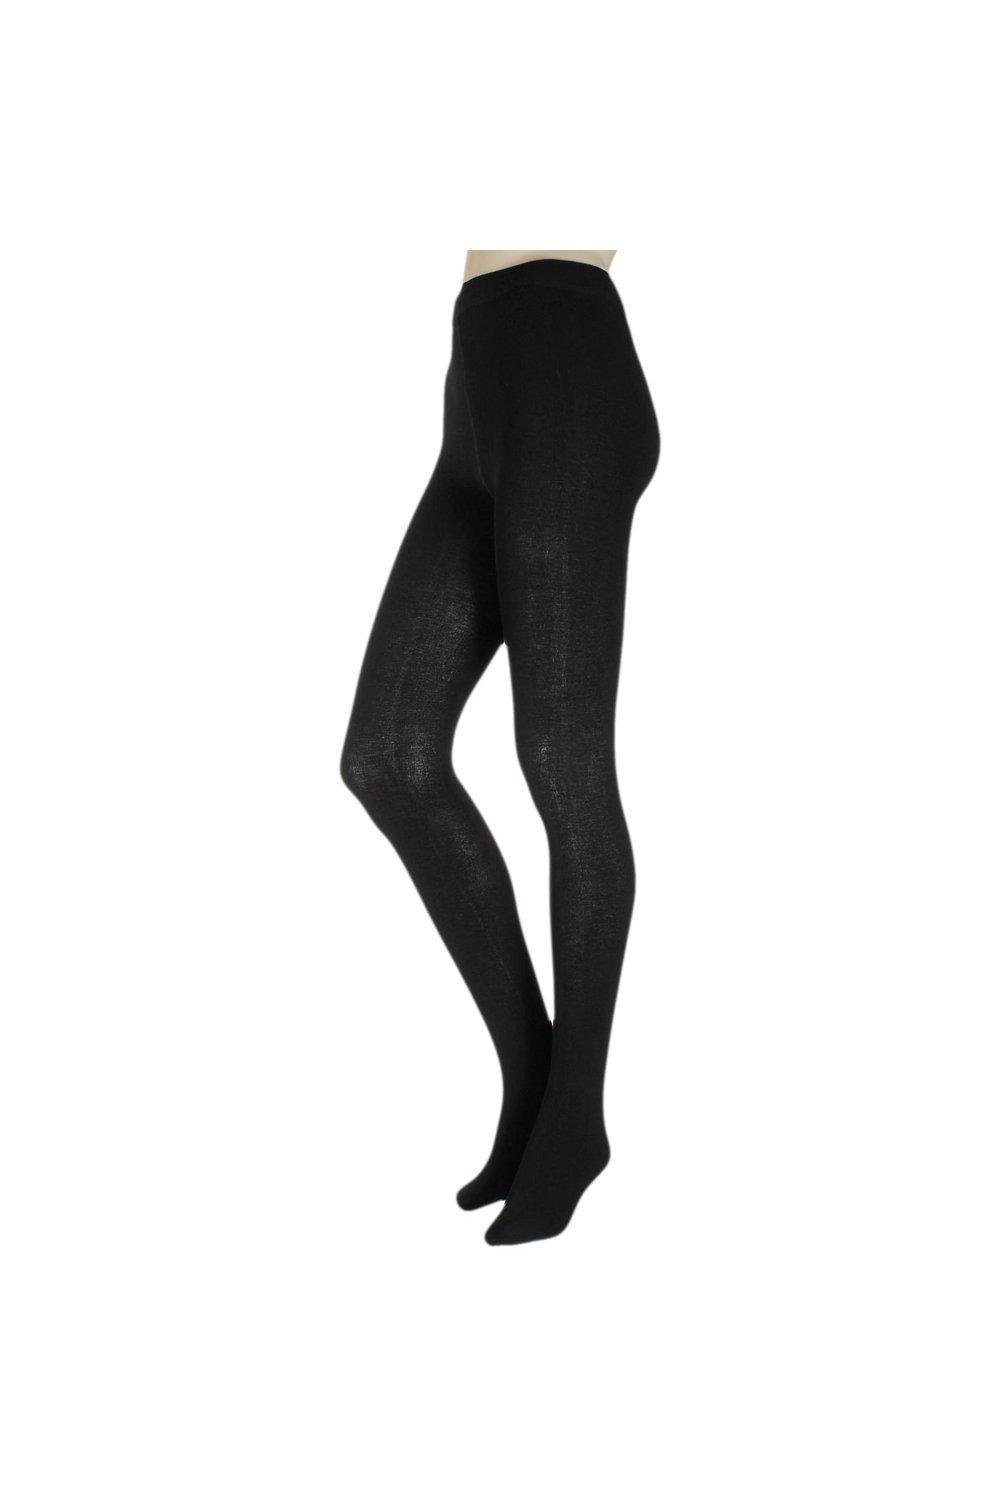 1 Pair Brushed Inside Bamboo Tights